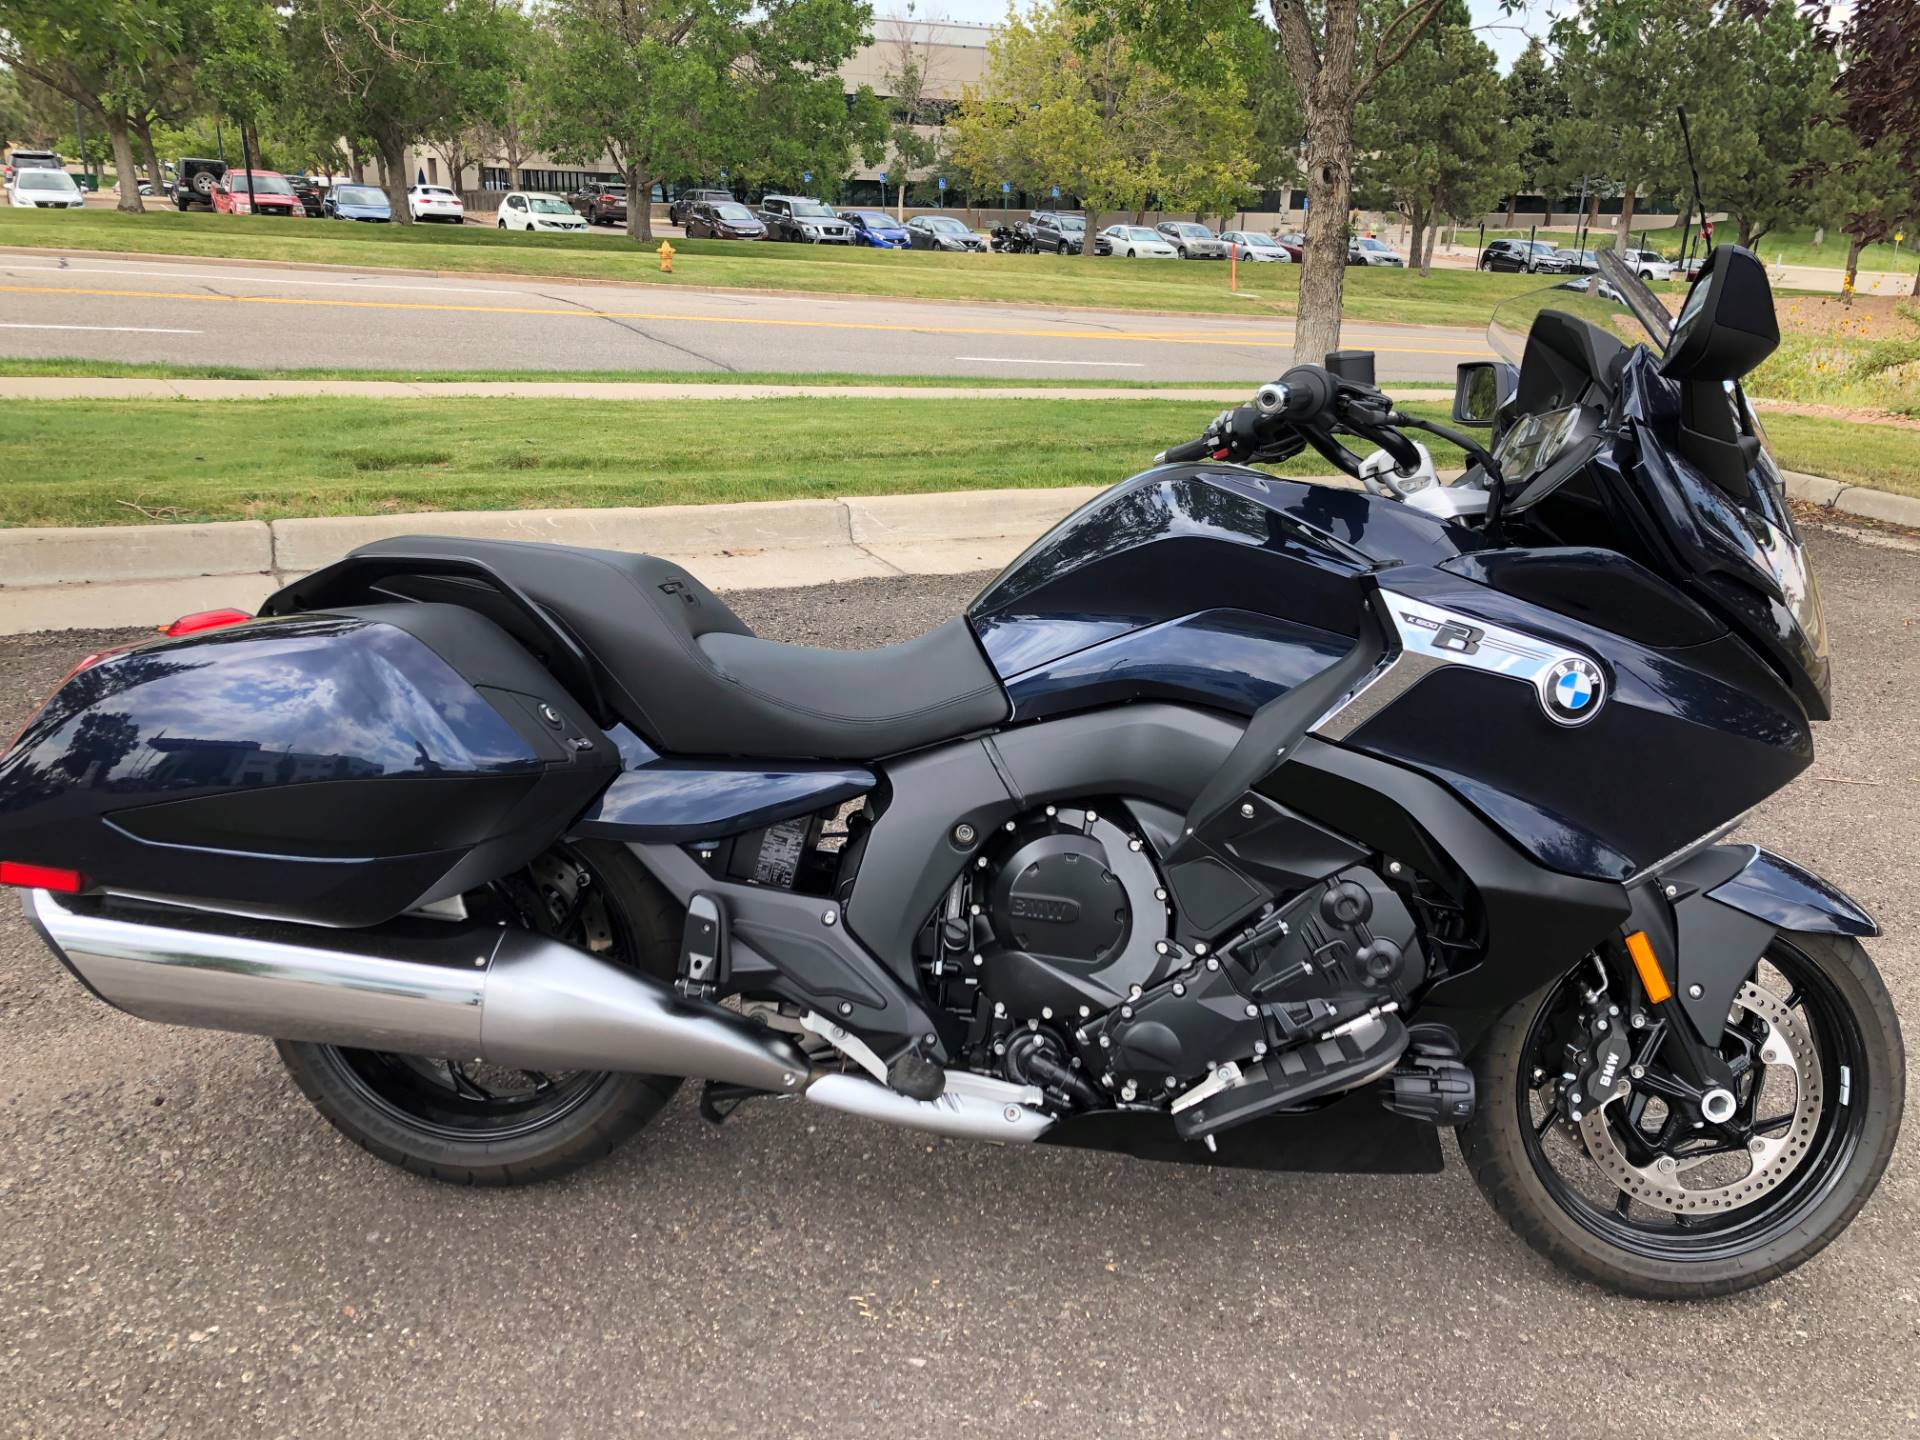 Used 19 Bmw K 1600 B Motorcycles In Centennial Co